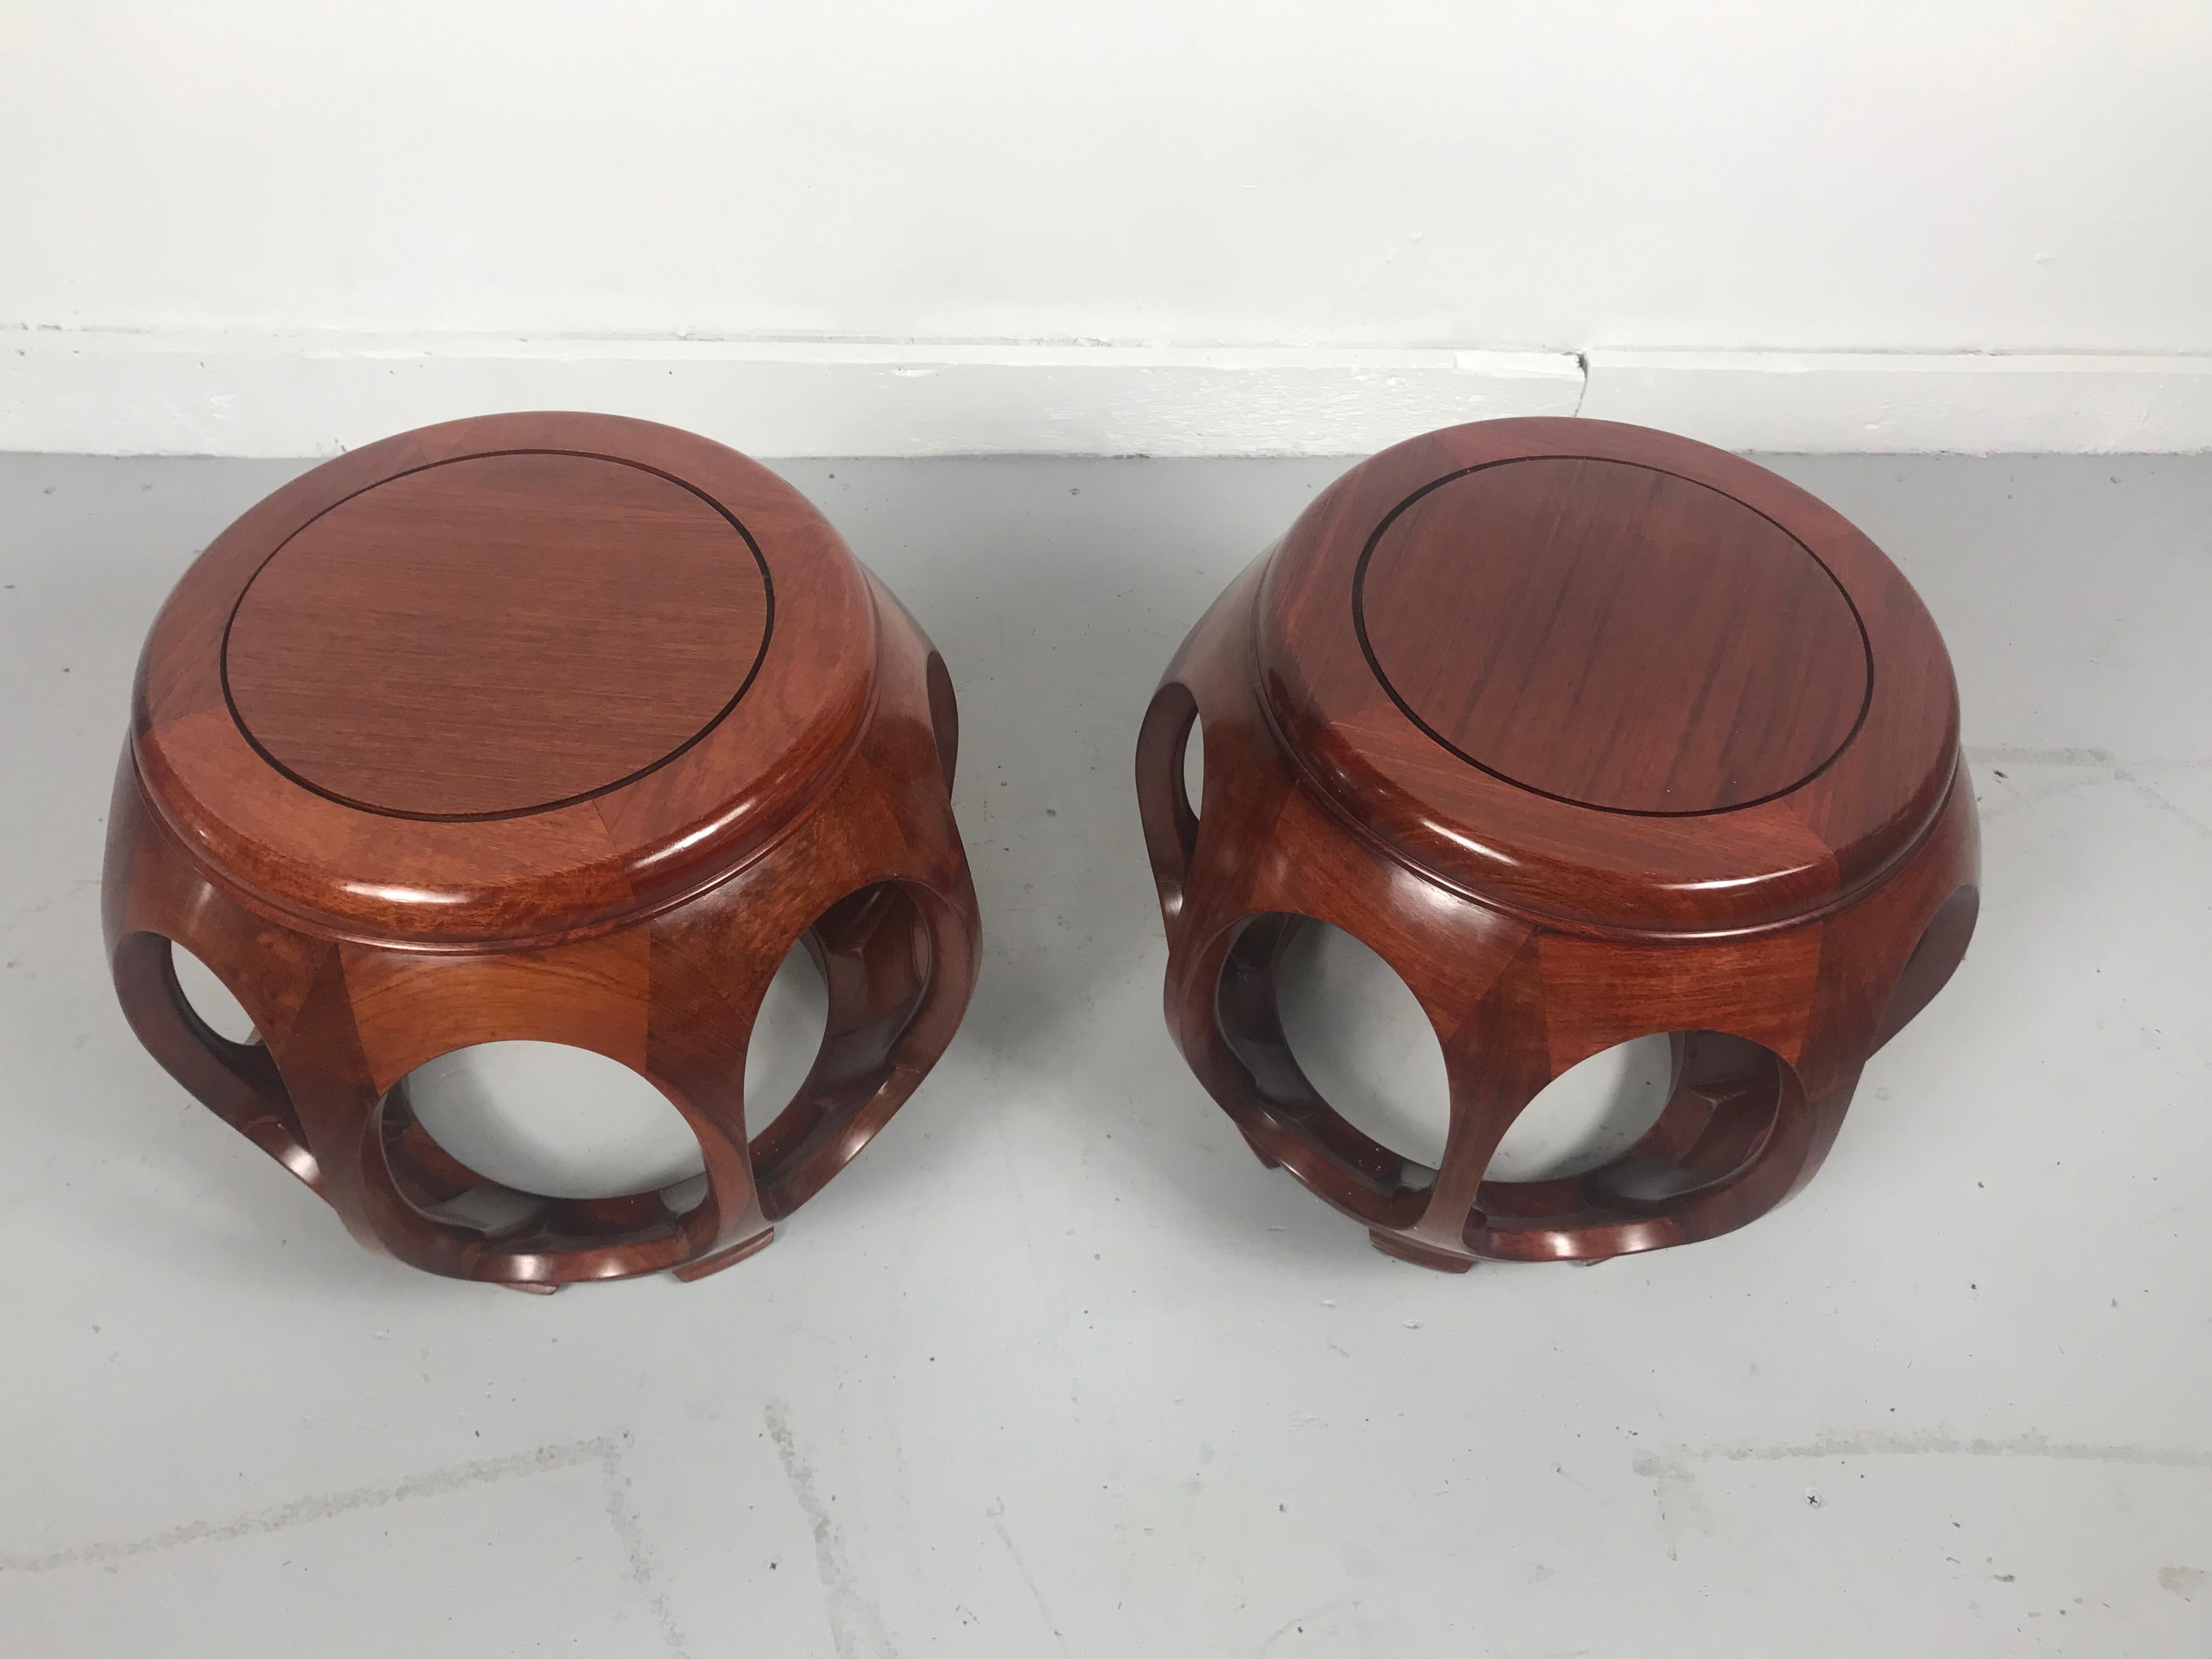 Pair of Asian rosewood garden stools mid-20th century, imported from Asia, sold through Baker Furniture. Beautifully crafted solid rosewood construction, dovetail joinery, Classic form, wonderful warm color and finish.